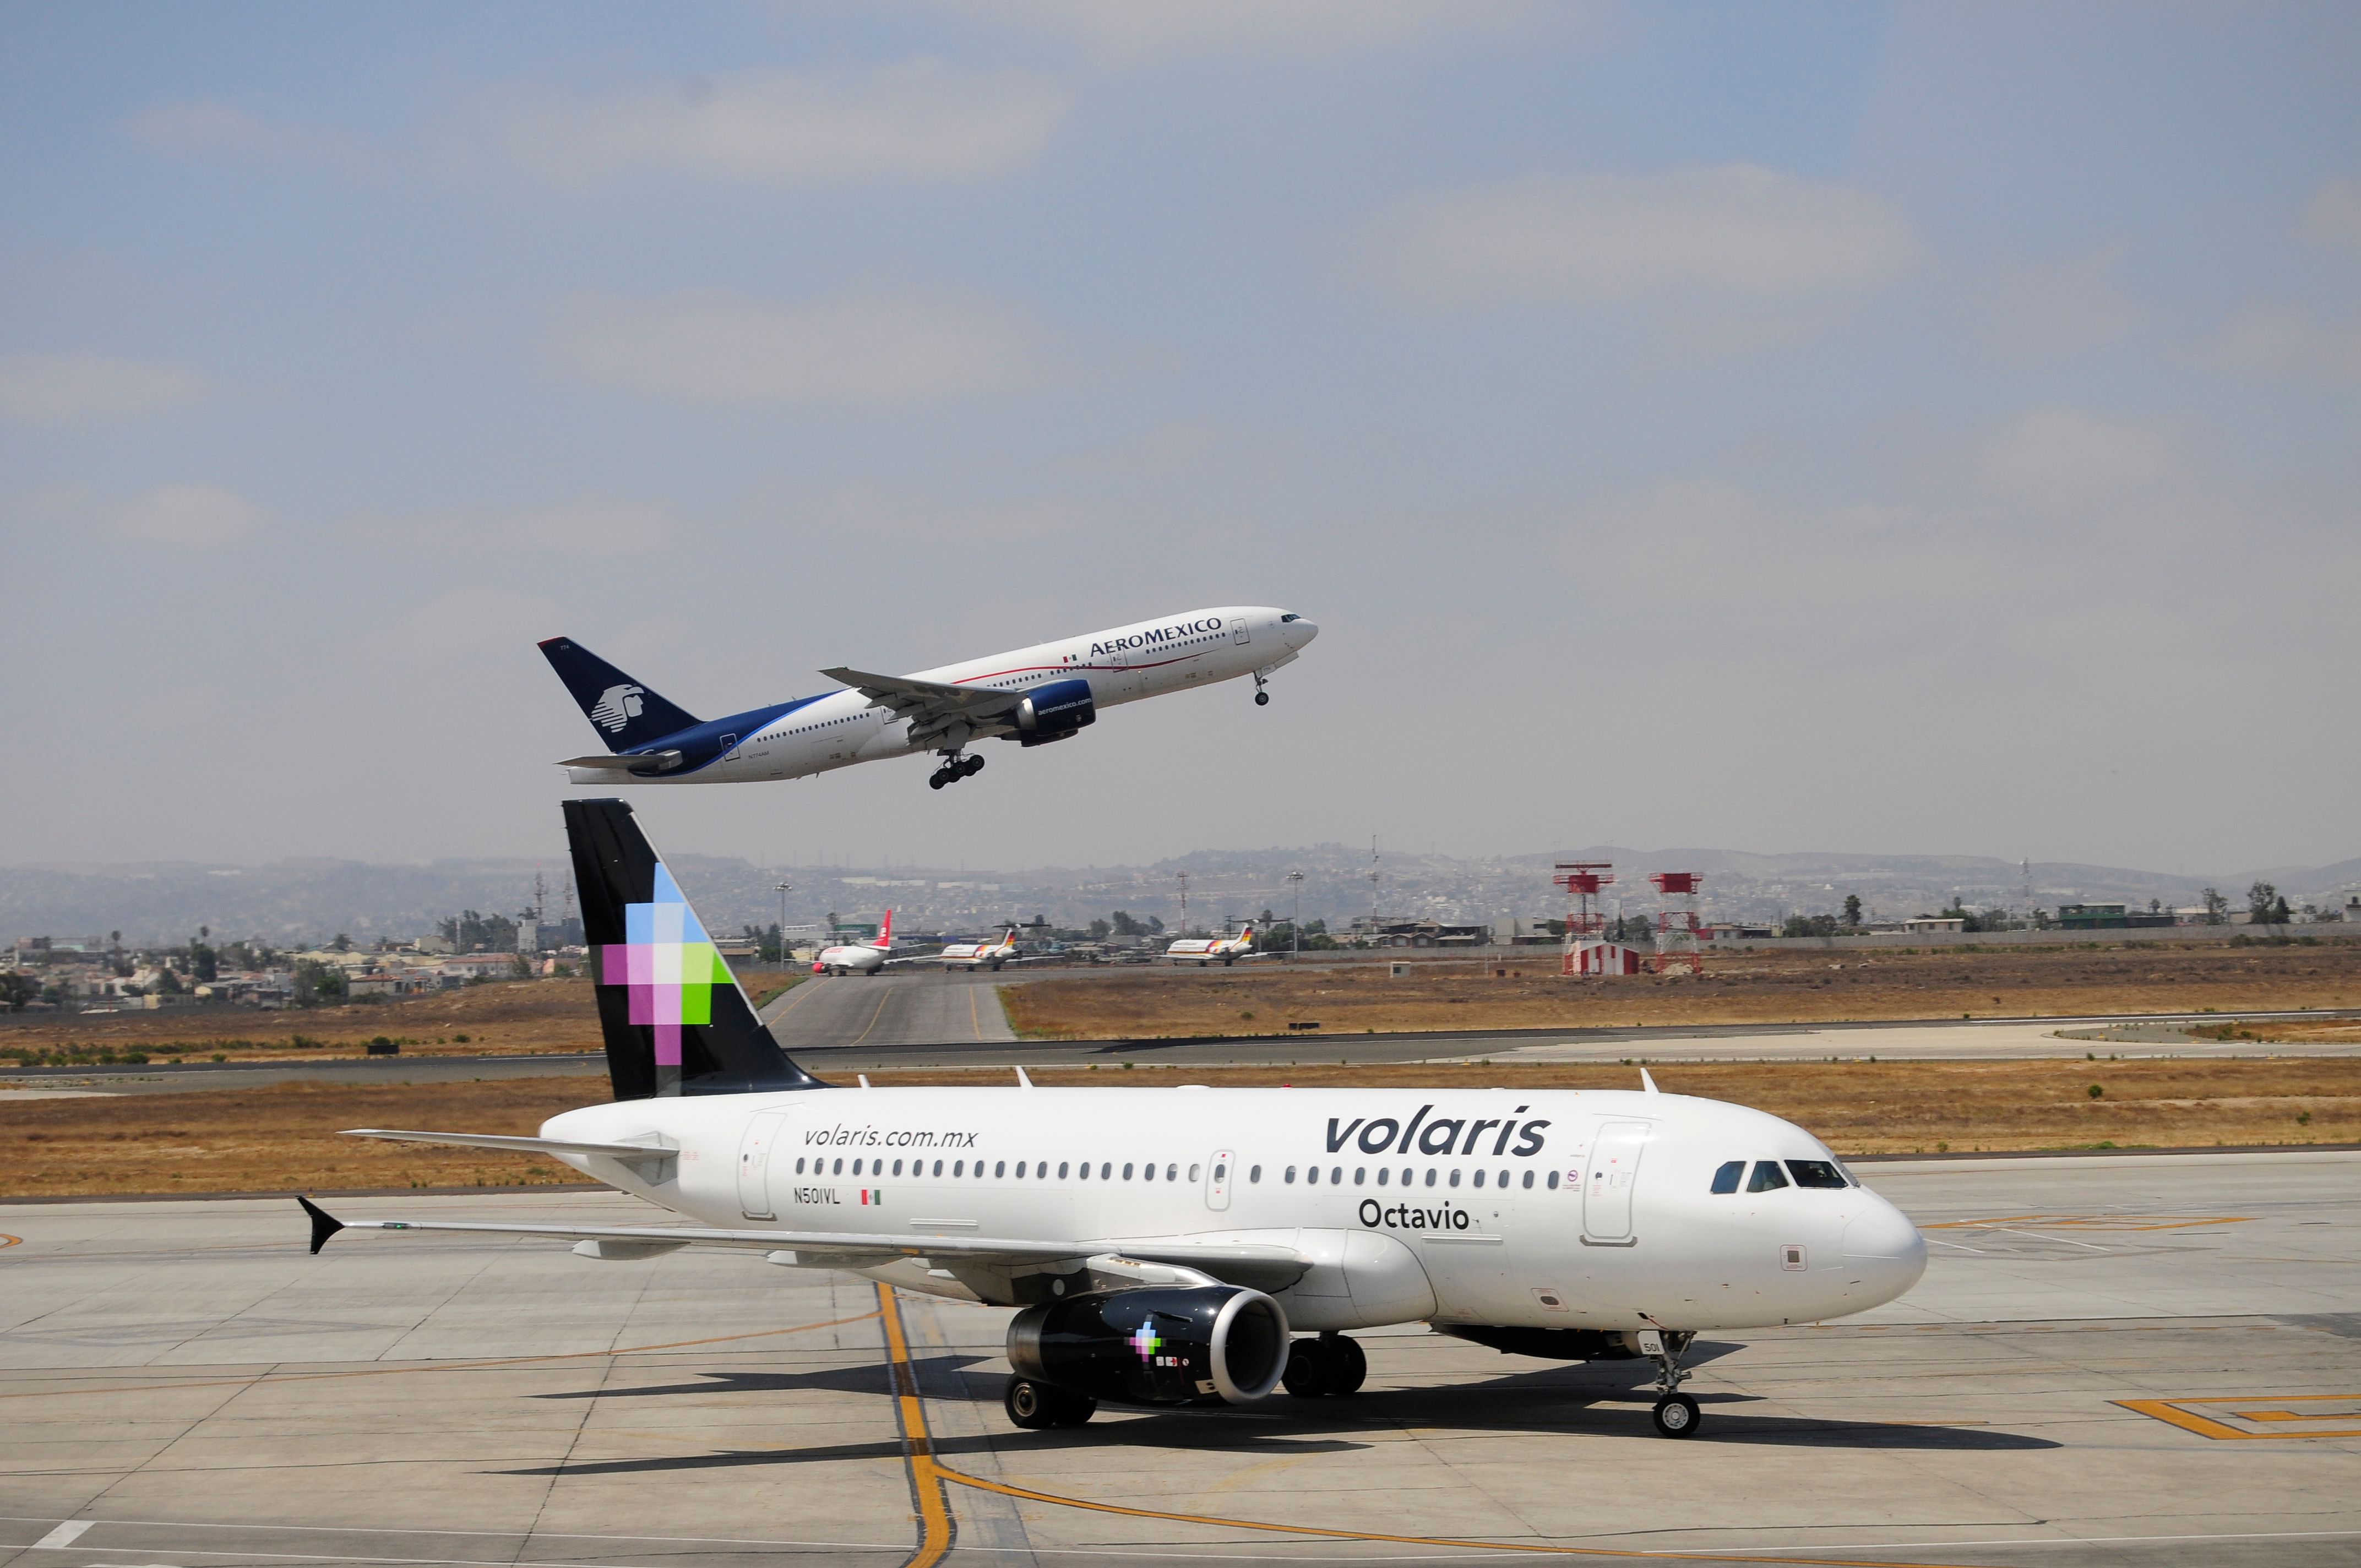 Volaris airline (on Land) and Aeromexico Airlines depart; both Mexican aircraft in the Tijuana international airport.